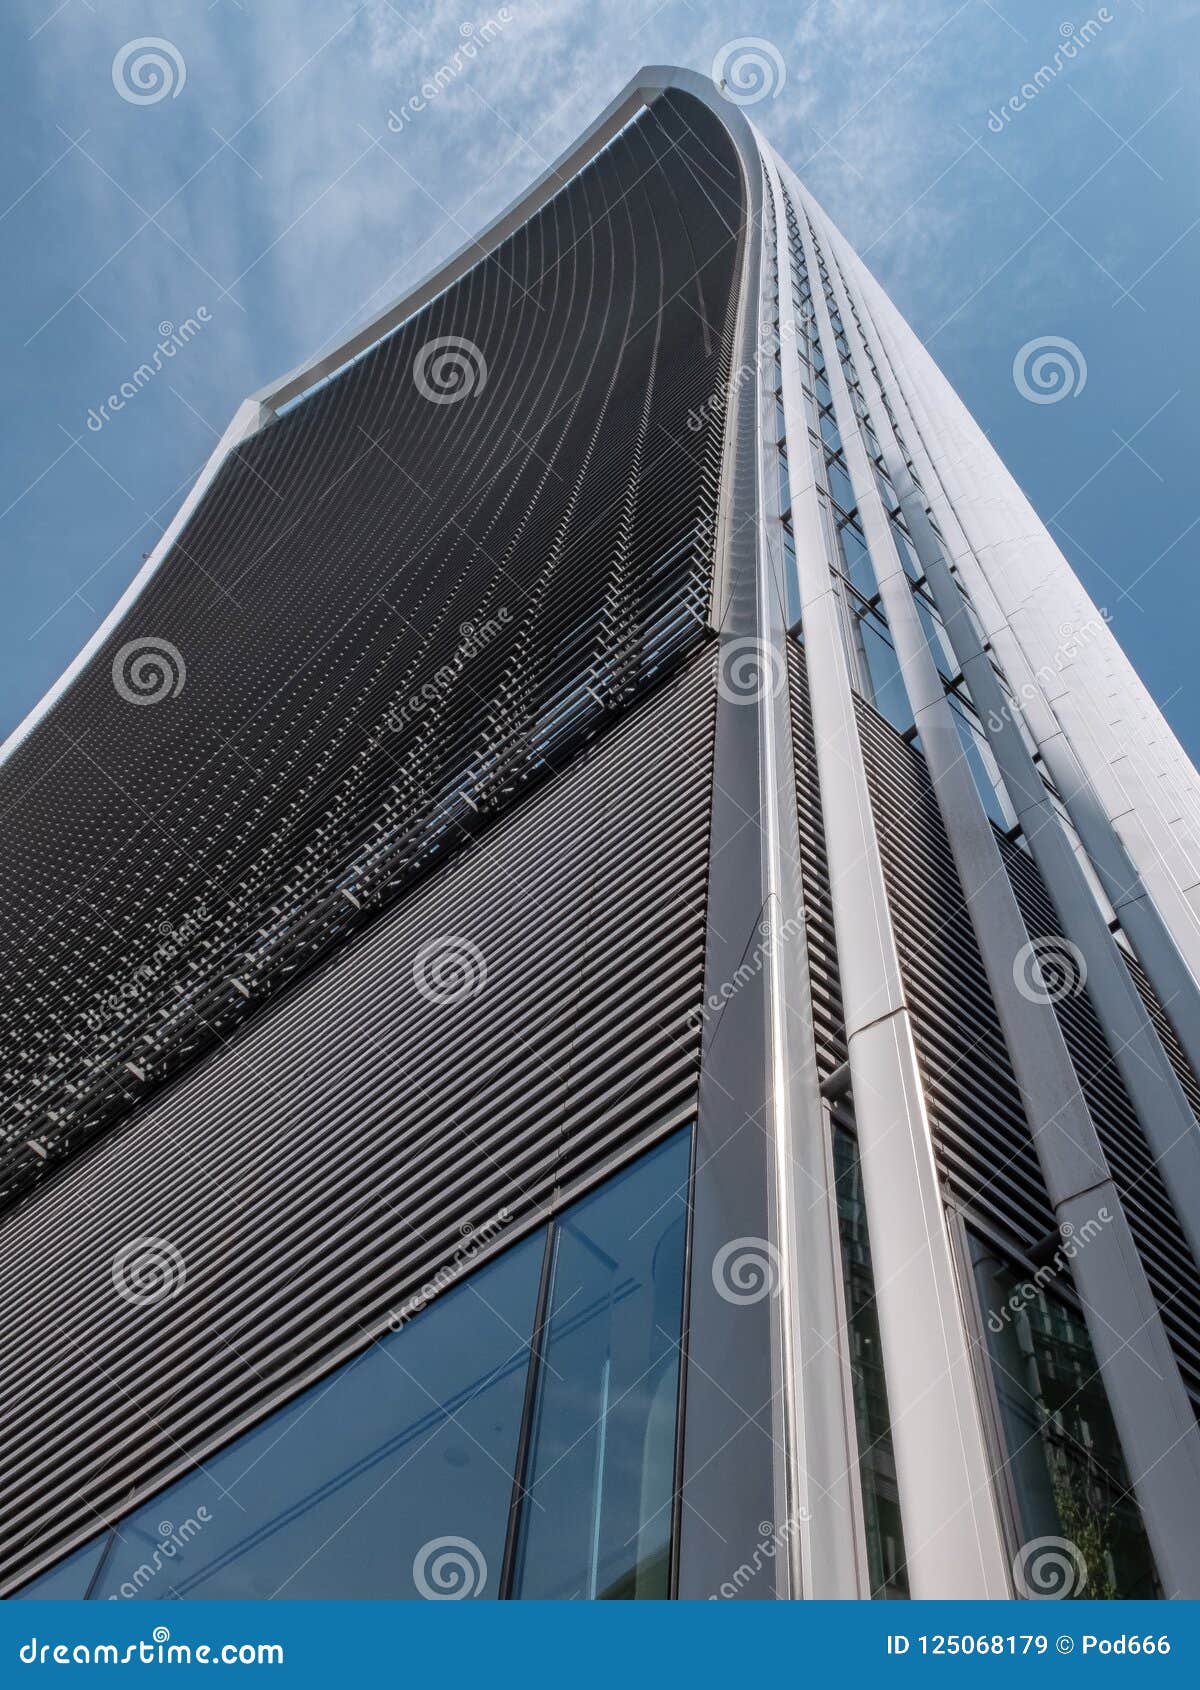 London Microphone Skyscraper Building Fecnchurch Street With